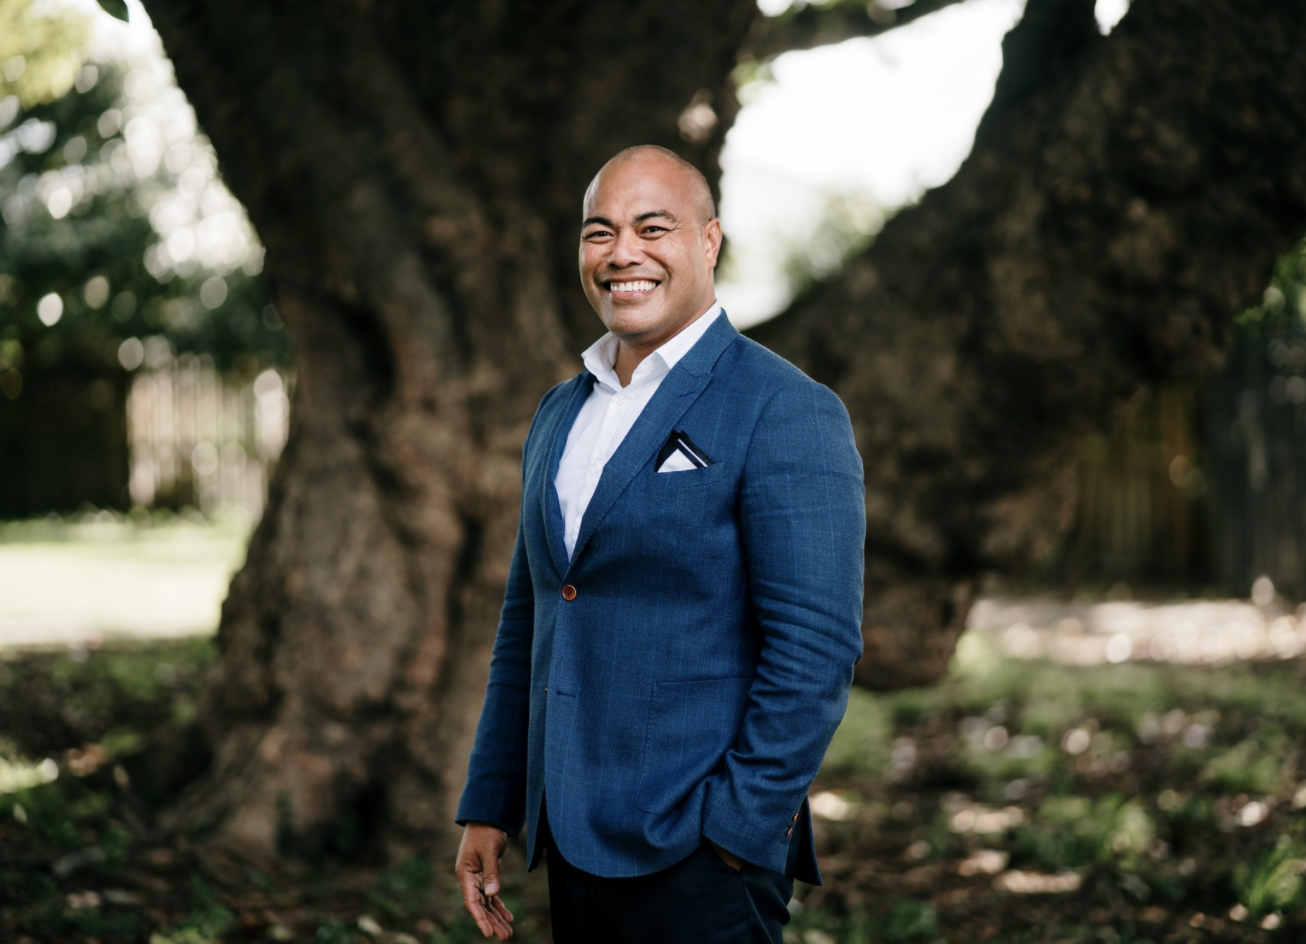 Viliami Vaea - From fireman to successful real estate agent